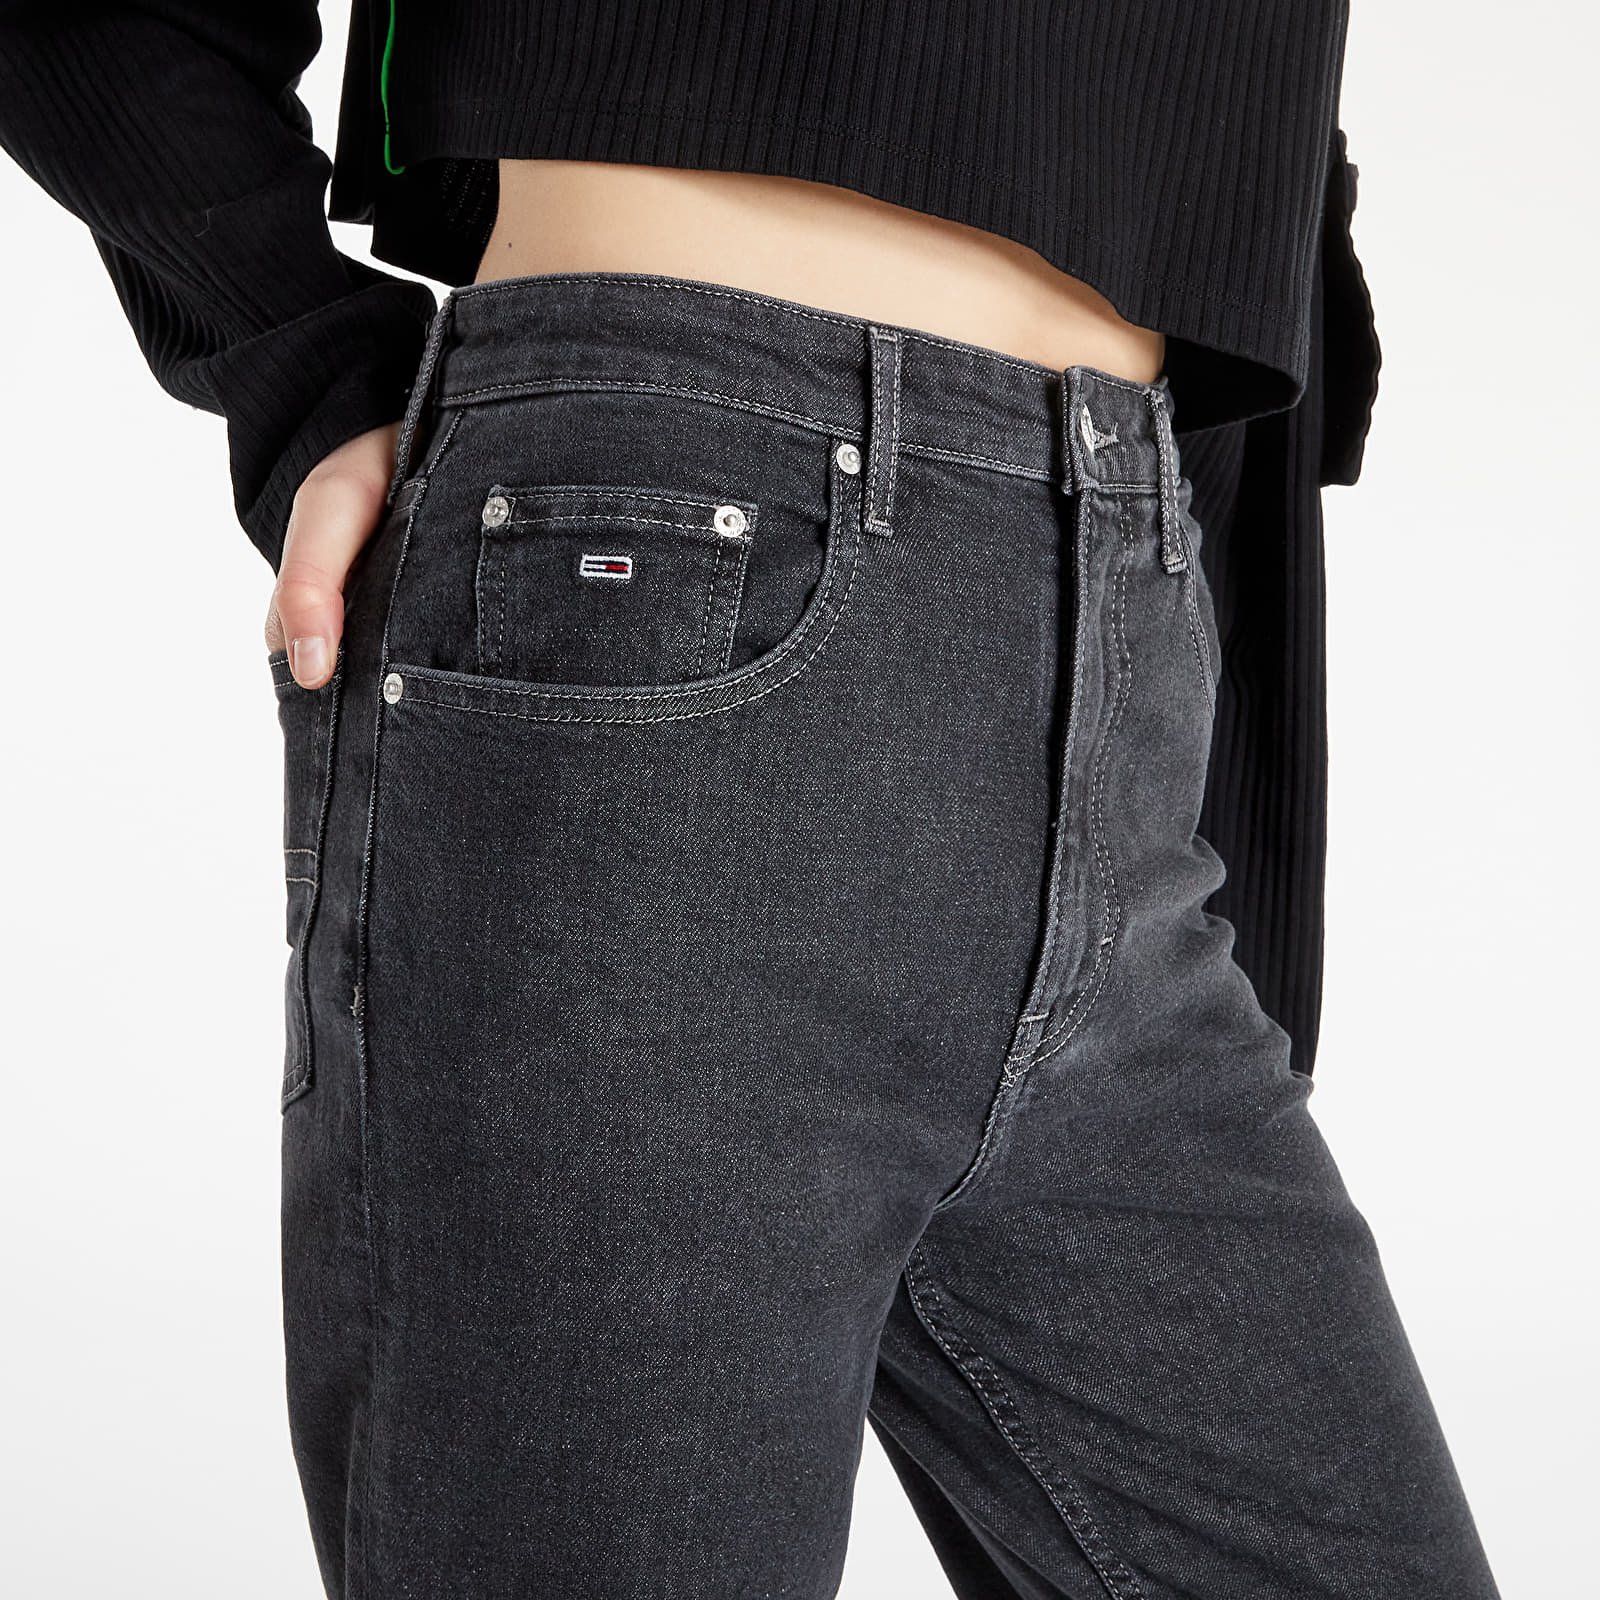 Mom Jeans Ultra High Rise Tapered Jeans